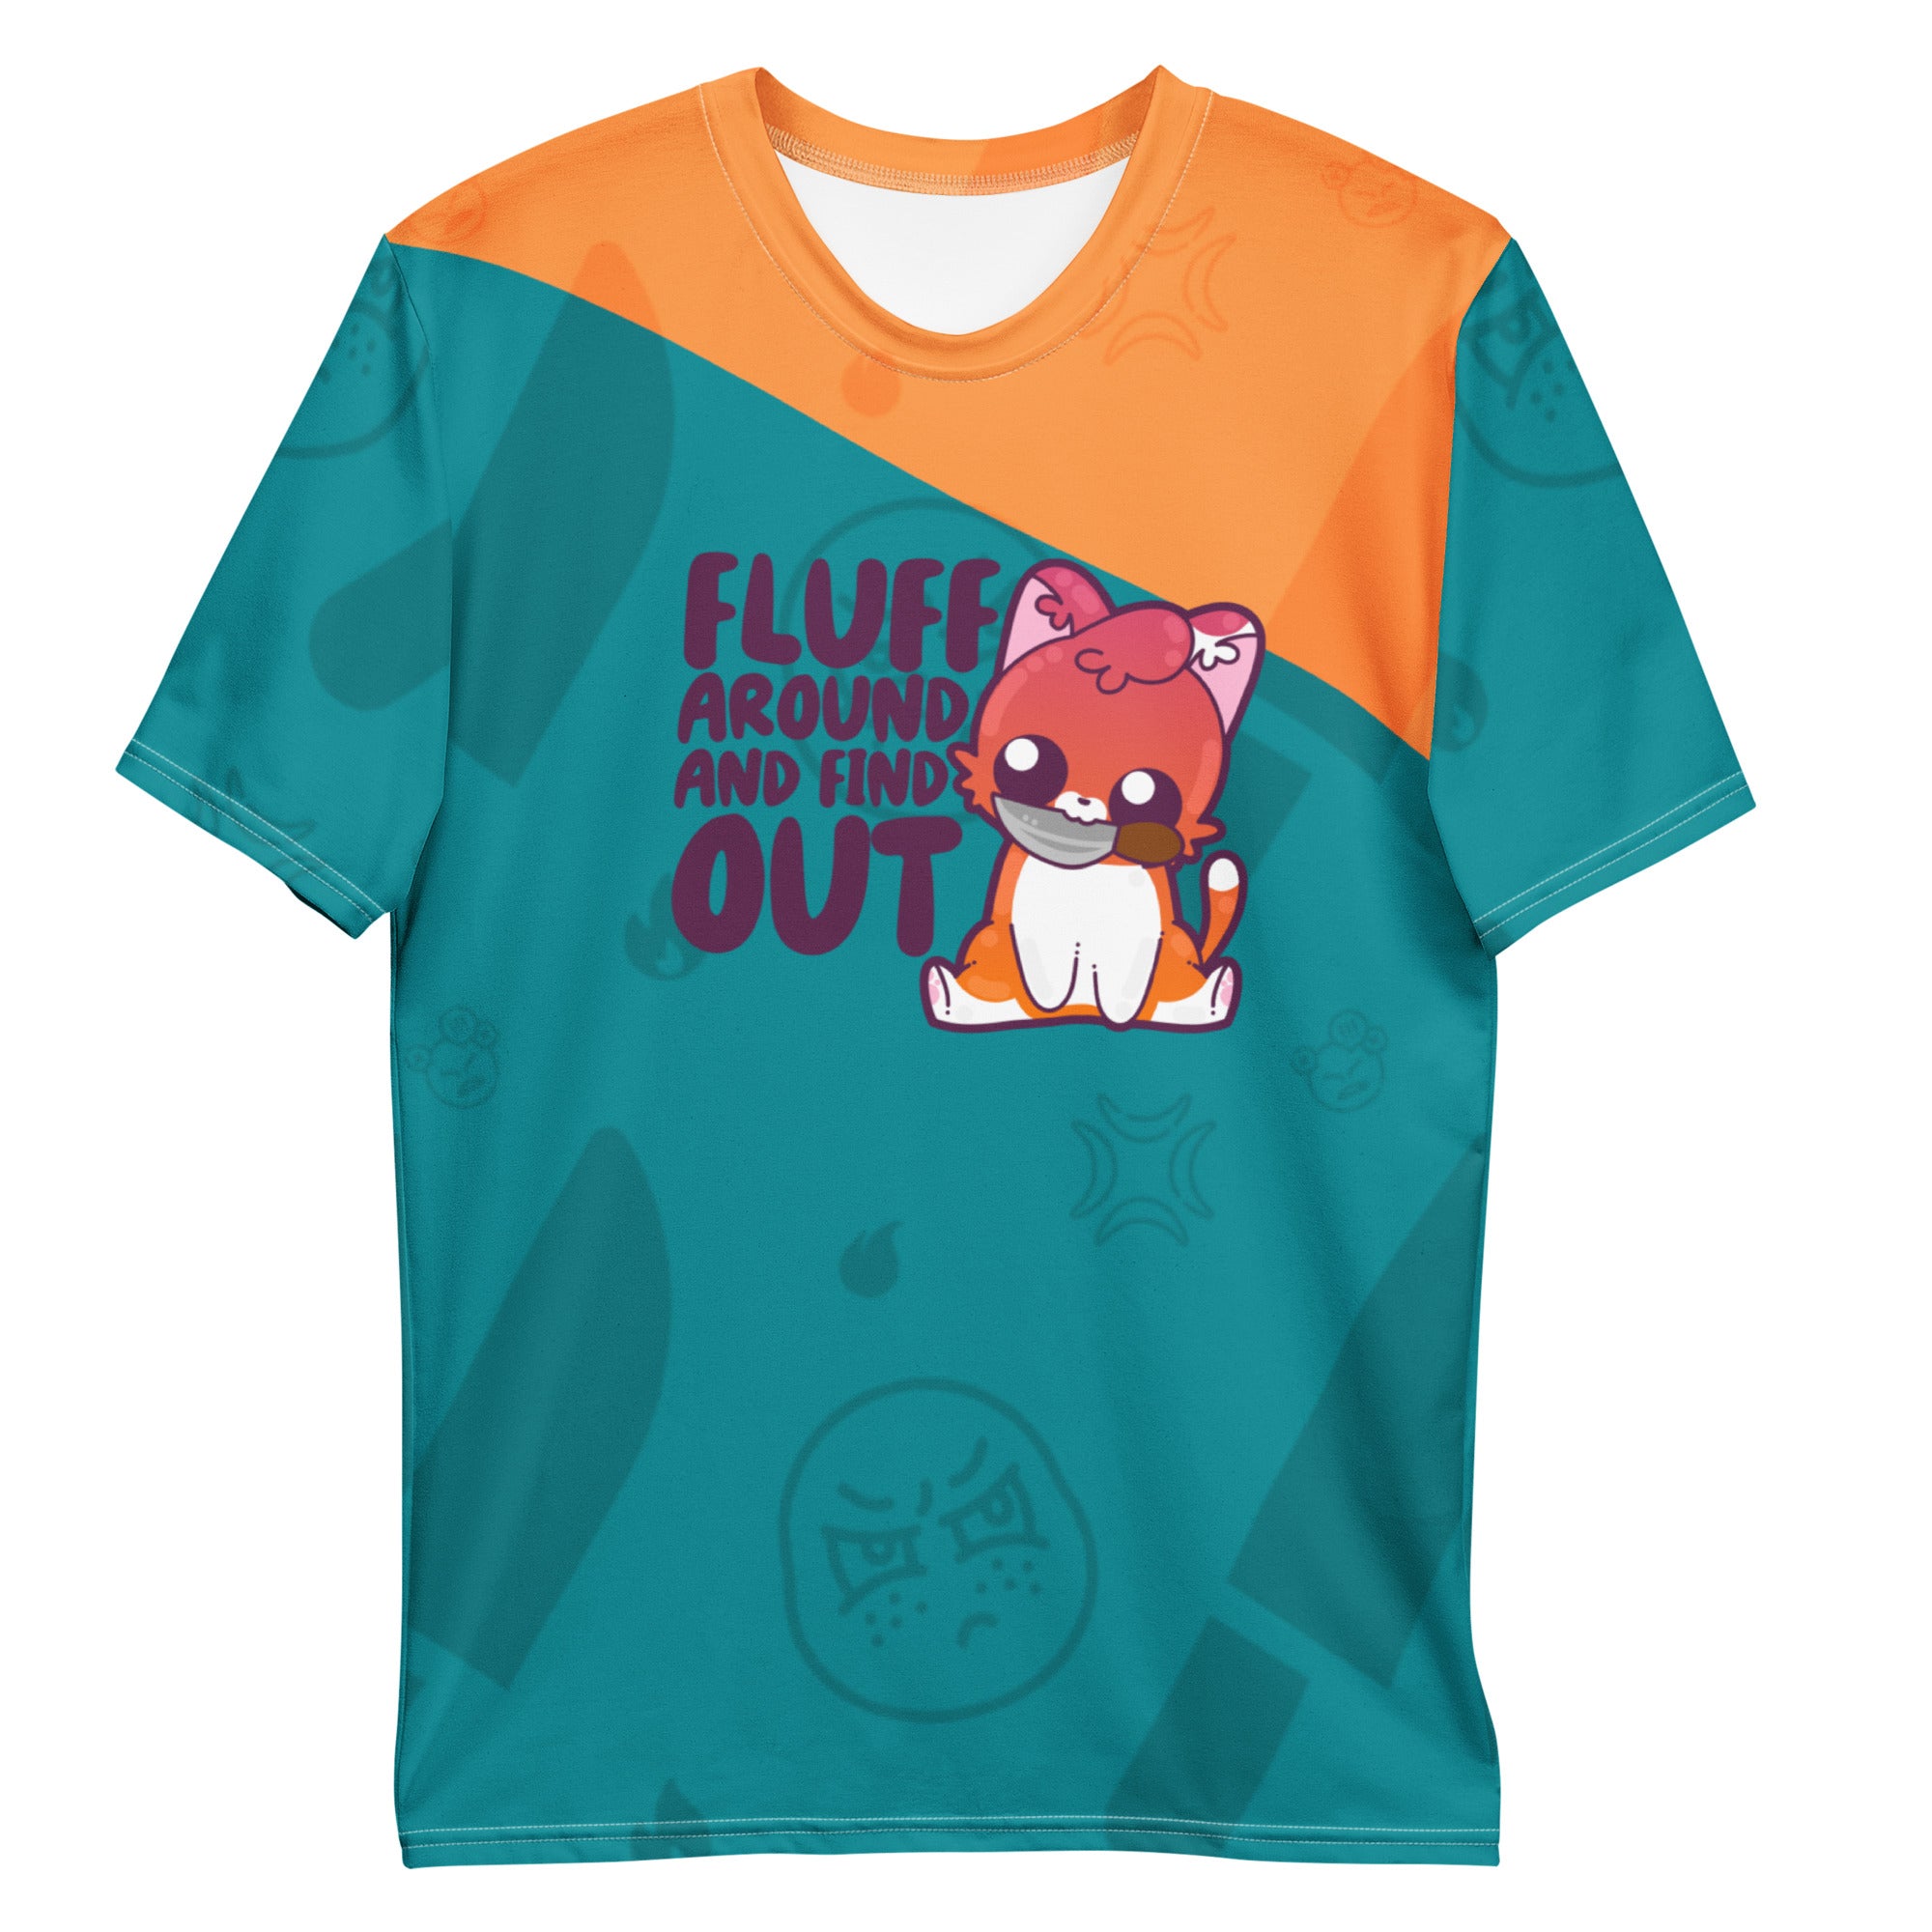 FLUFF AROUND AND FIND OUT - All-Over Print Tee